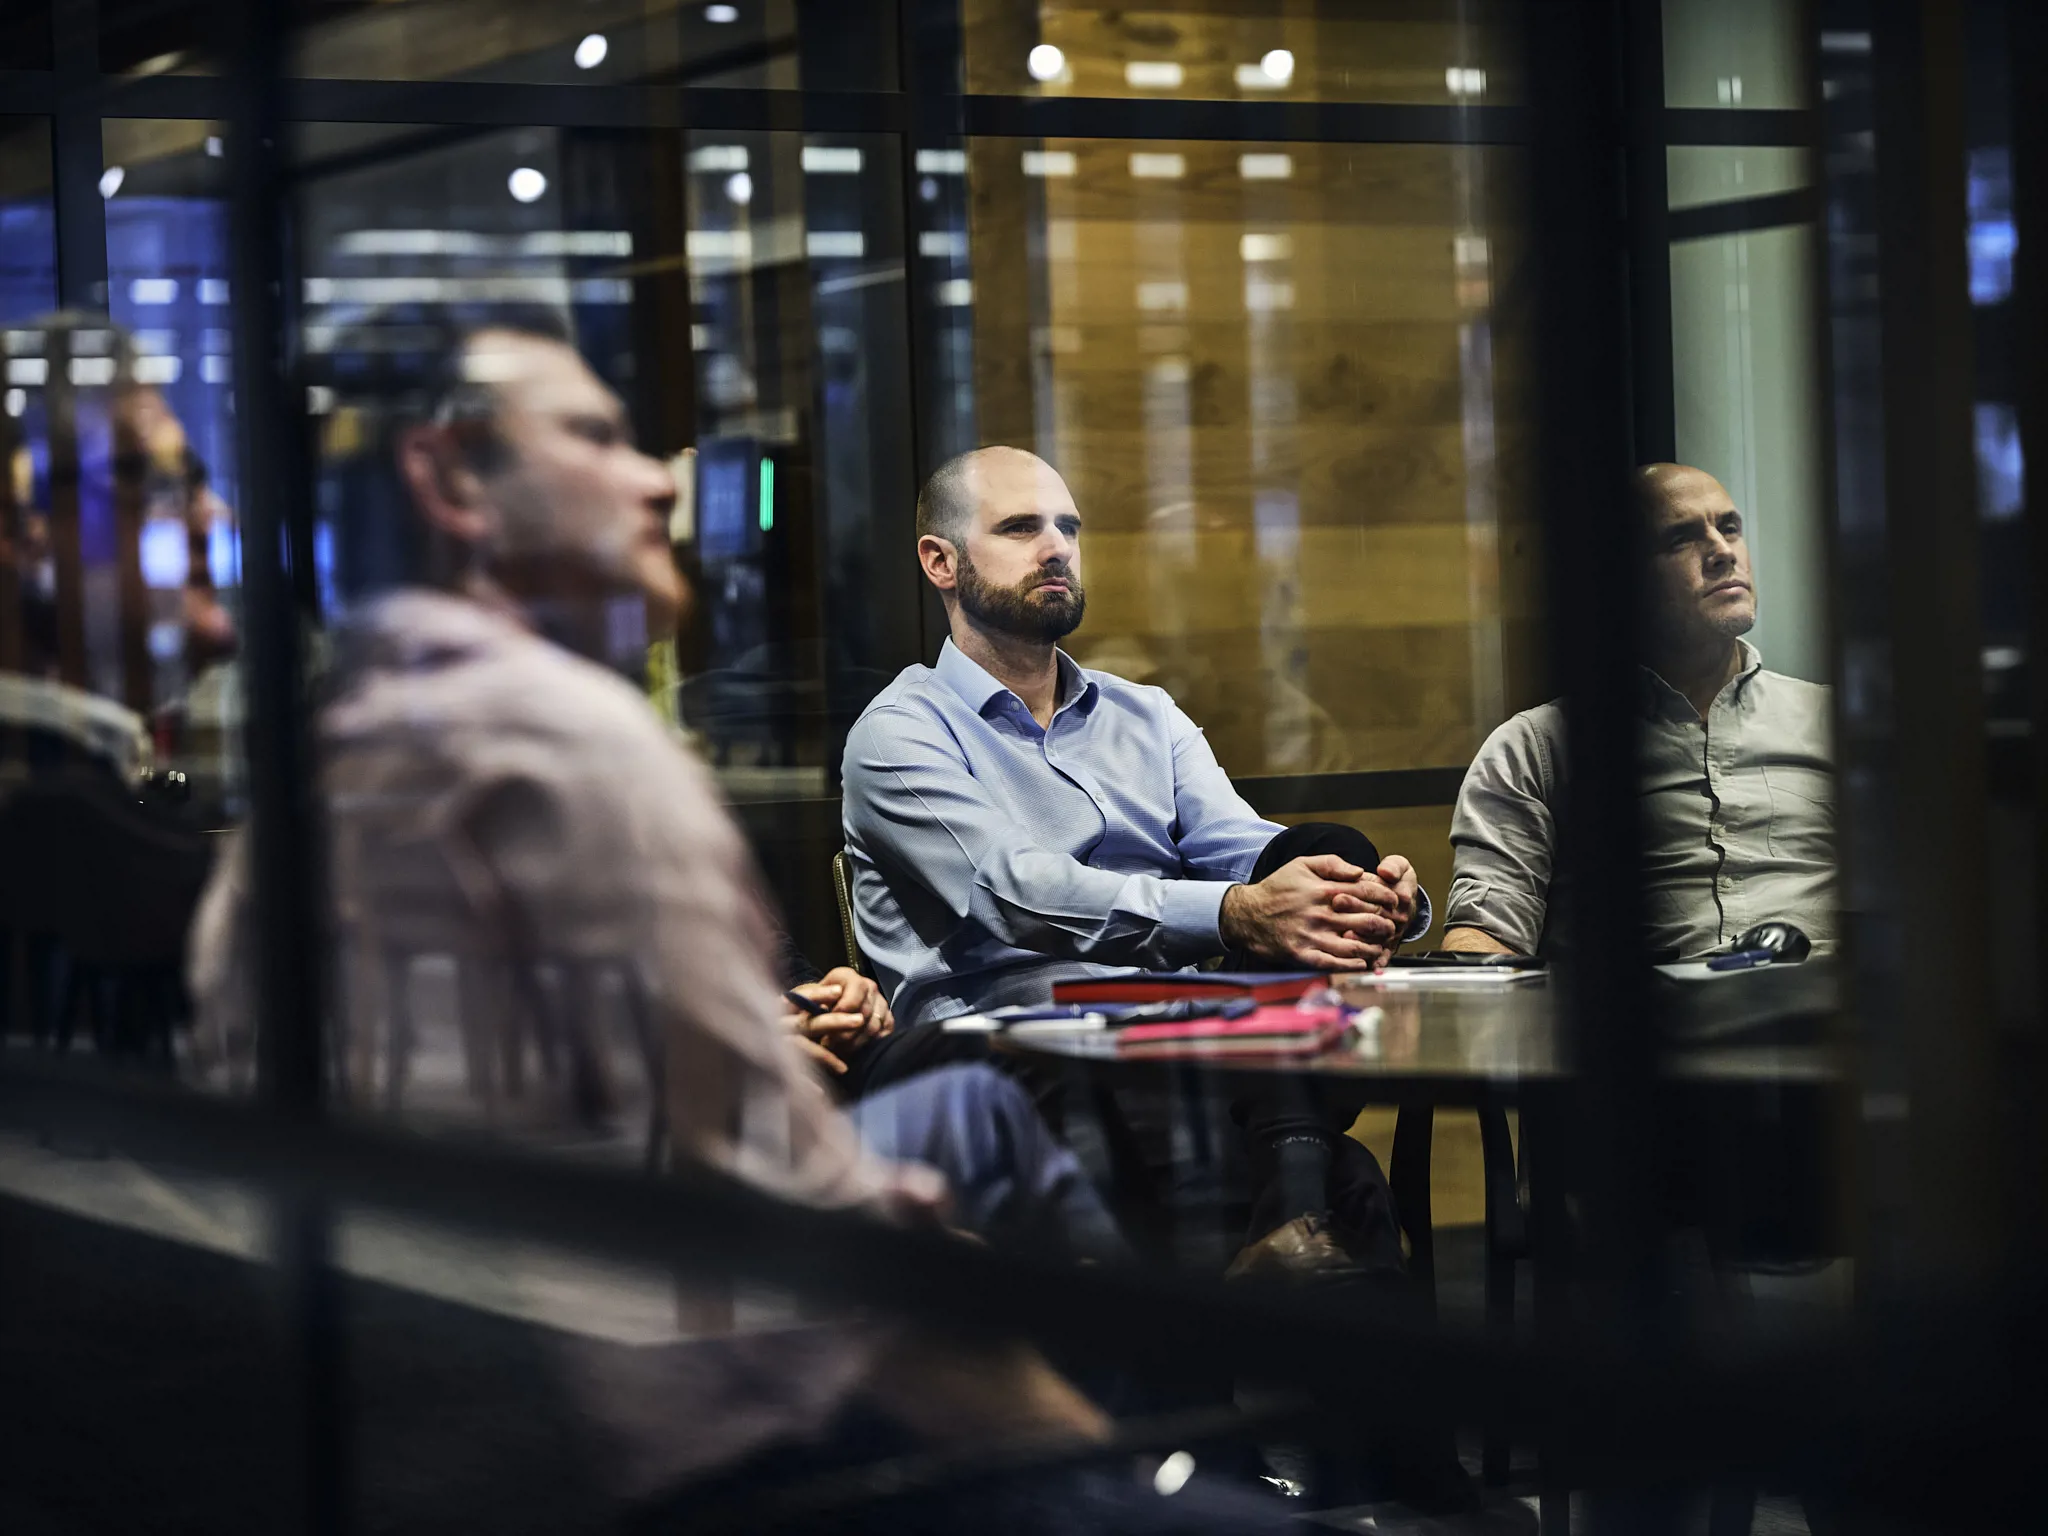 men in meeting, photographed through glass